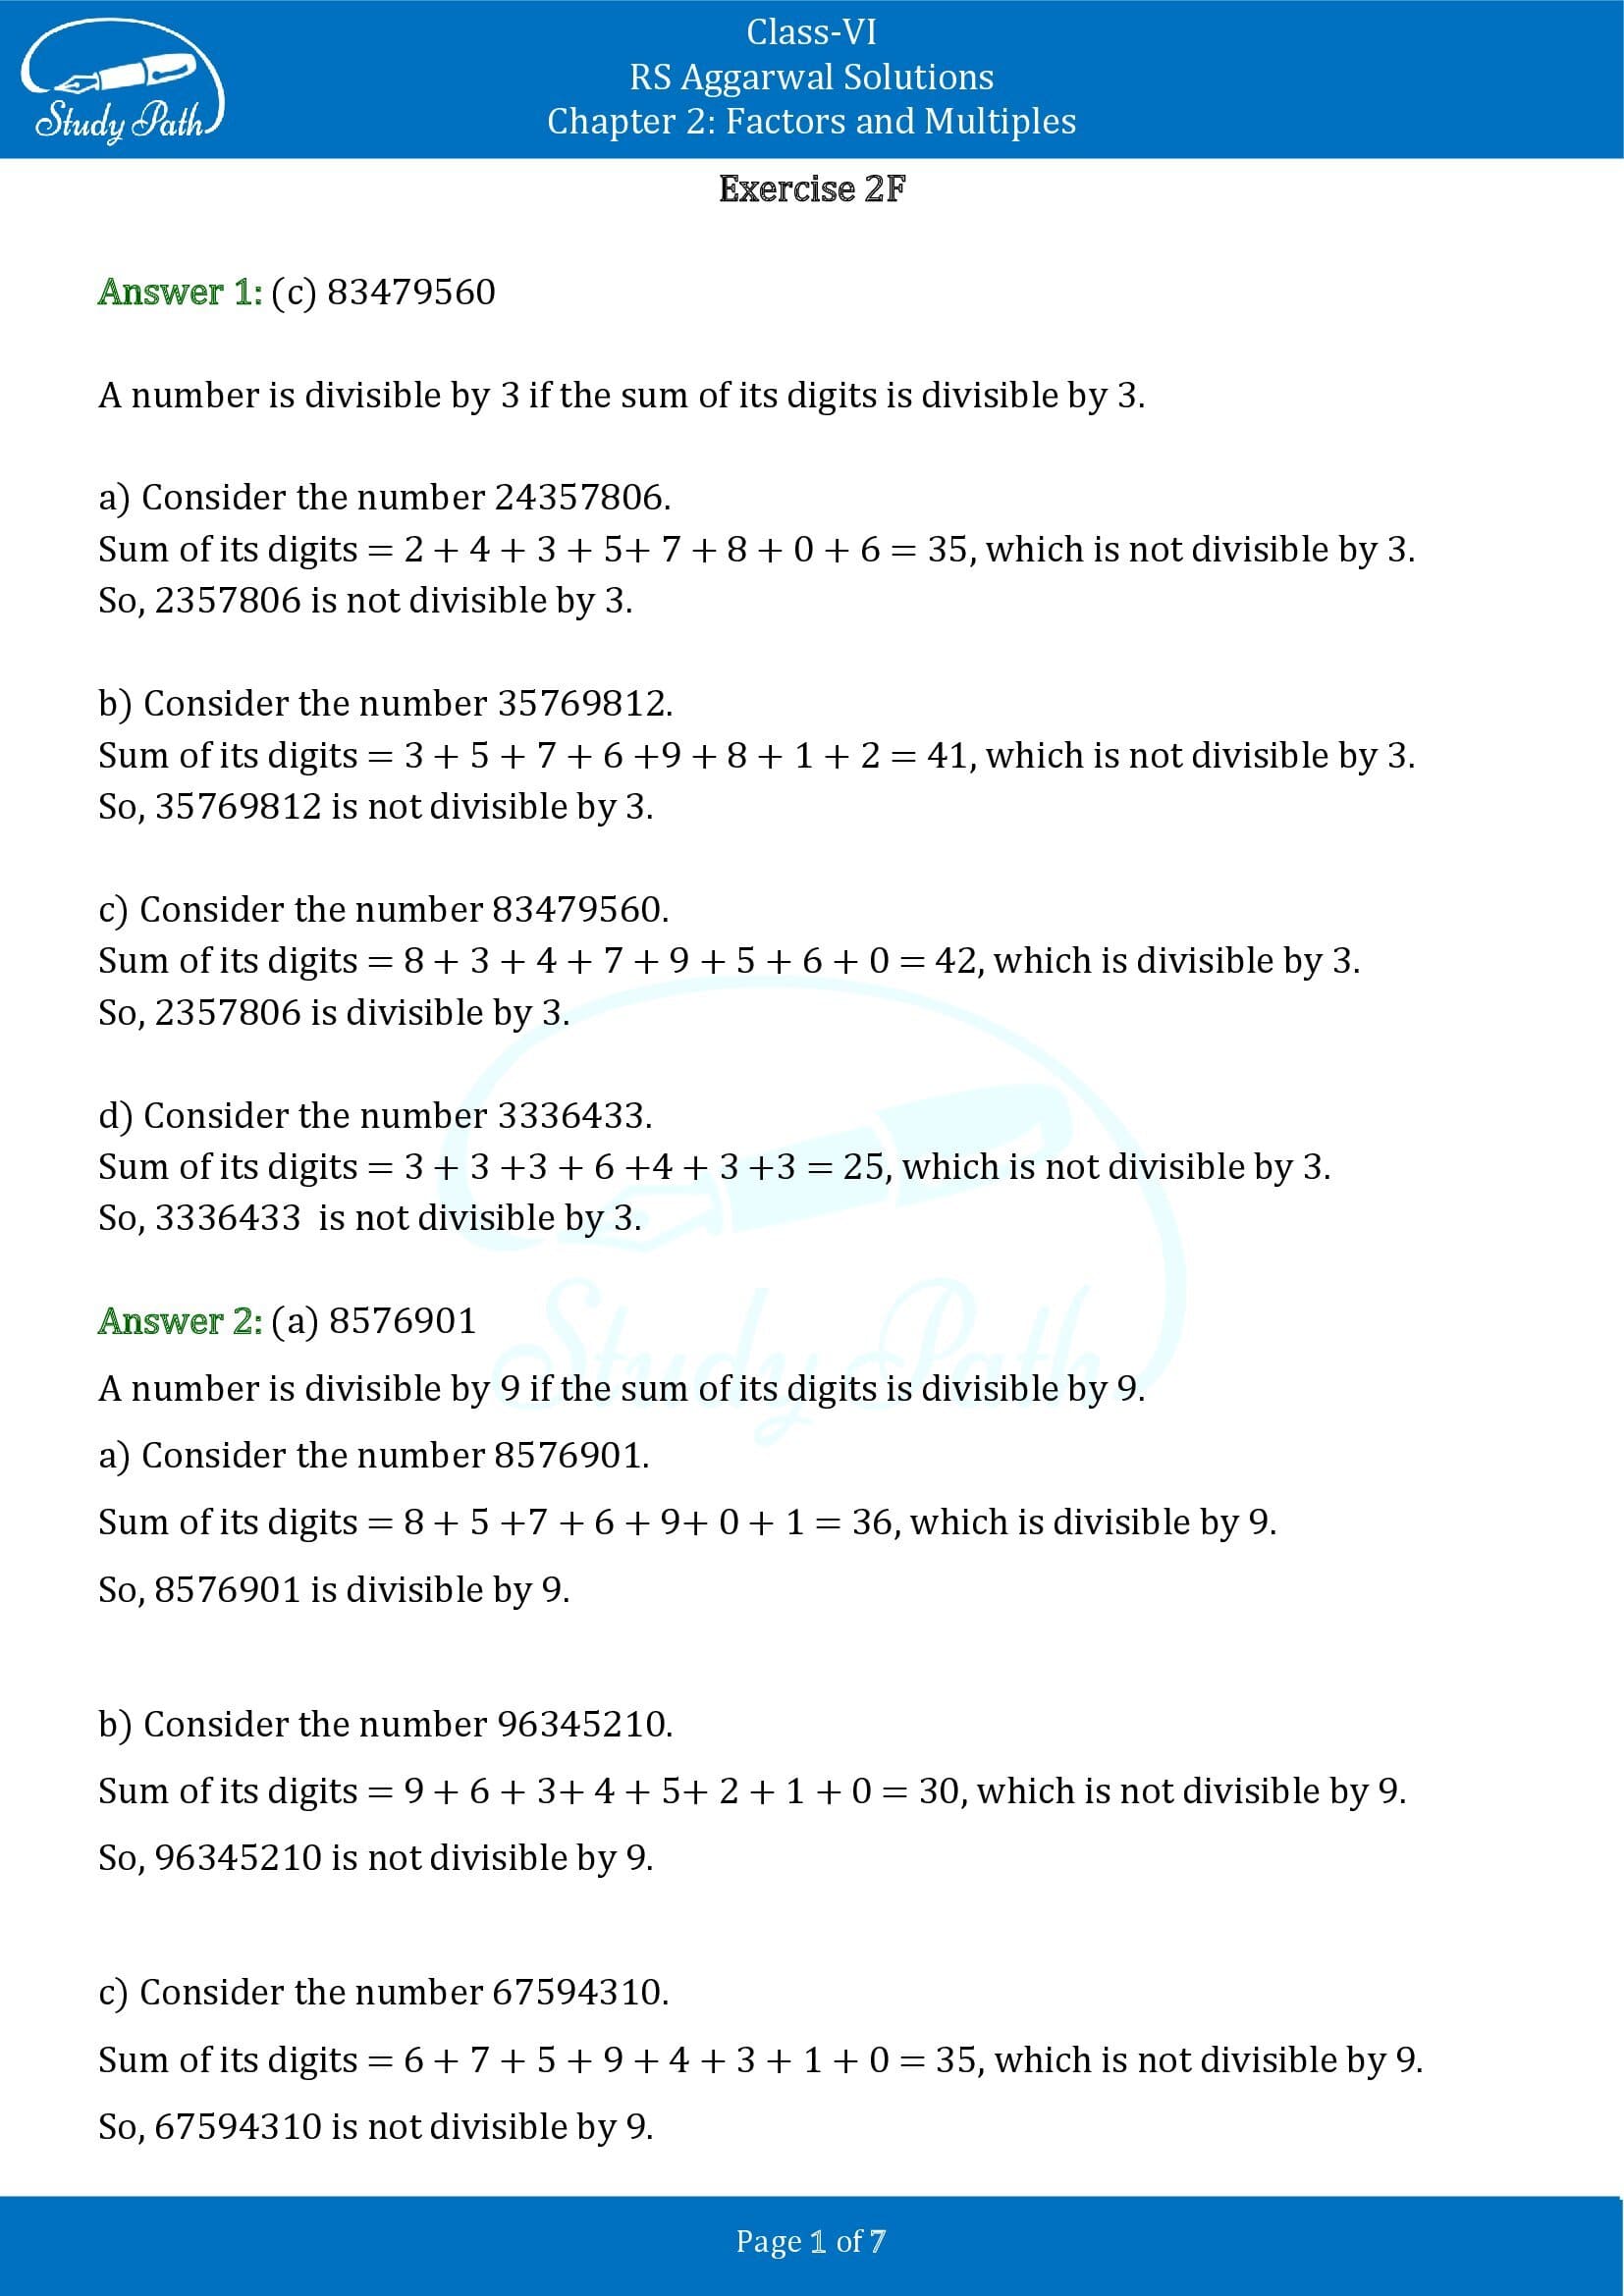 RS Aggarwal Solutions Class 6 Chapter 2 Factors and Multiples Exercise 2F MCQ 00001